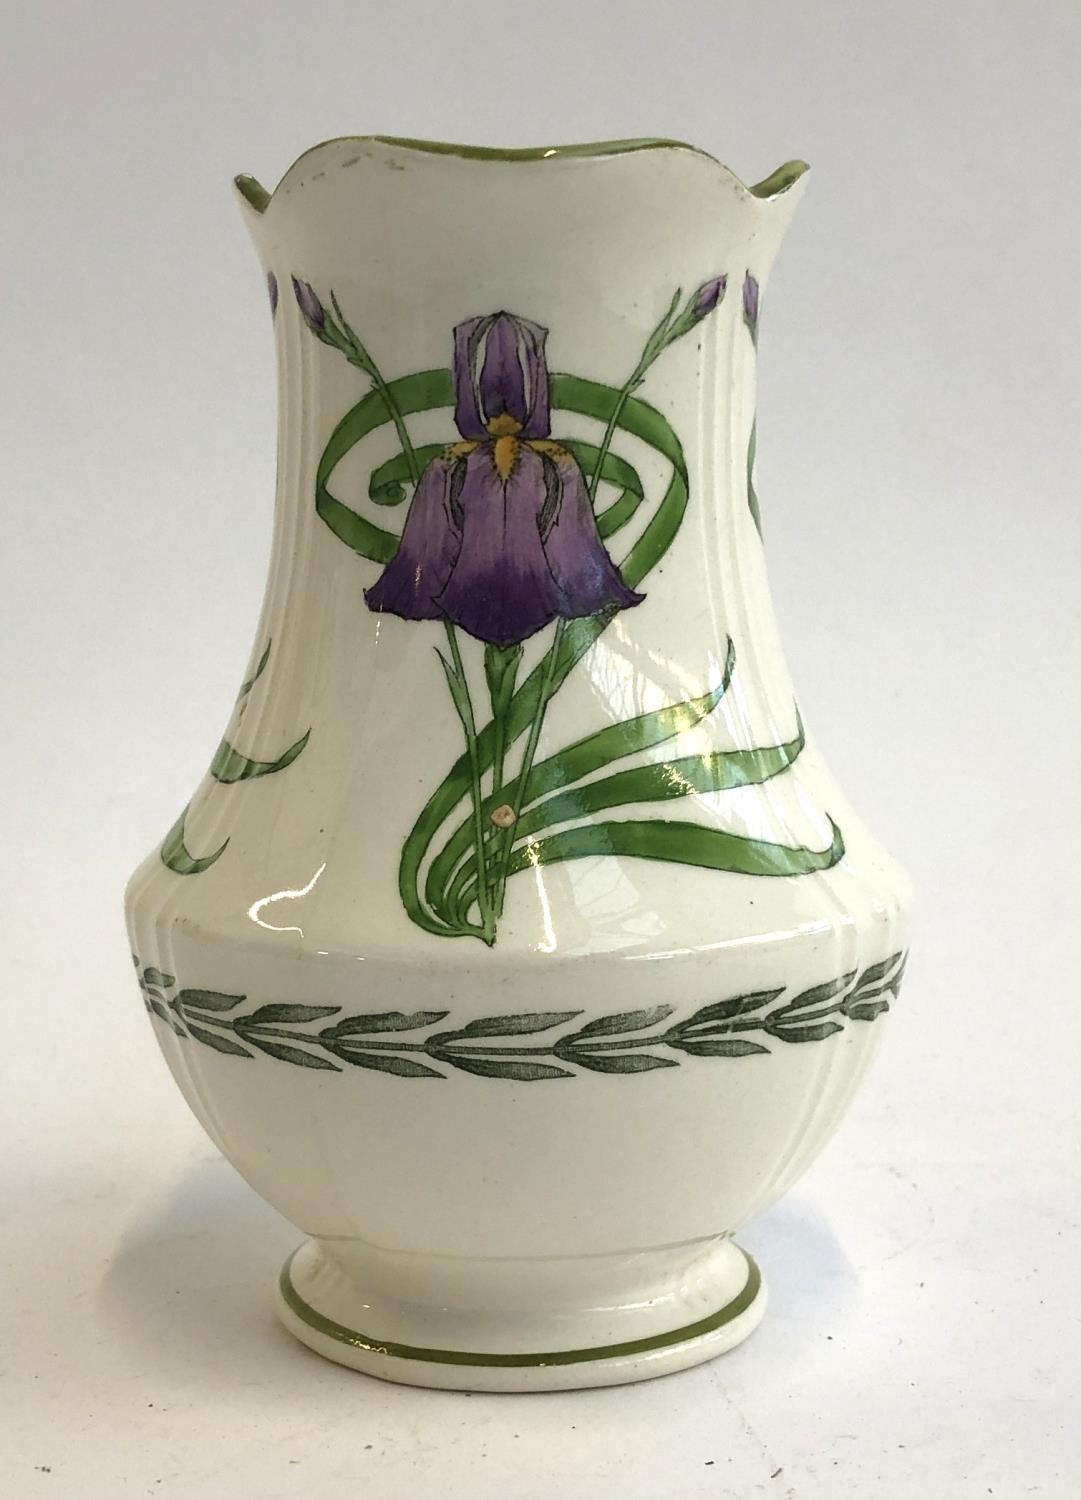 A Minton 'Iris' pattern vase, decorated with iris blooms & foliage, factory marks c1880s, 13.5cmH